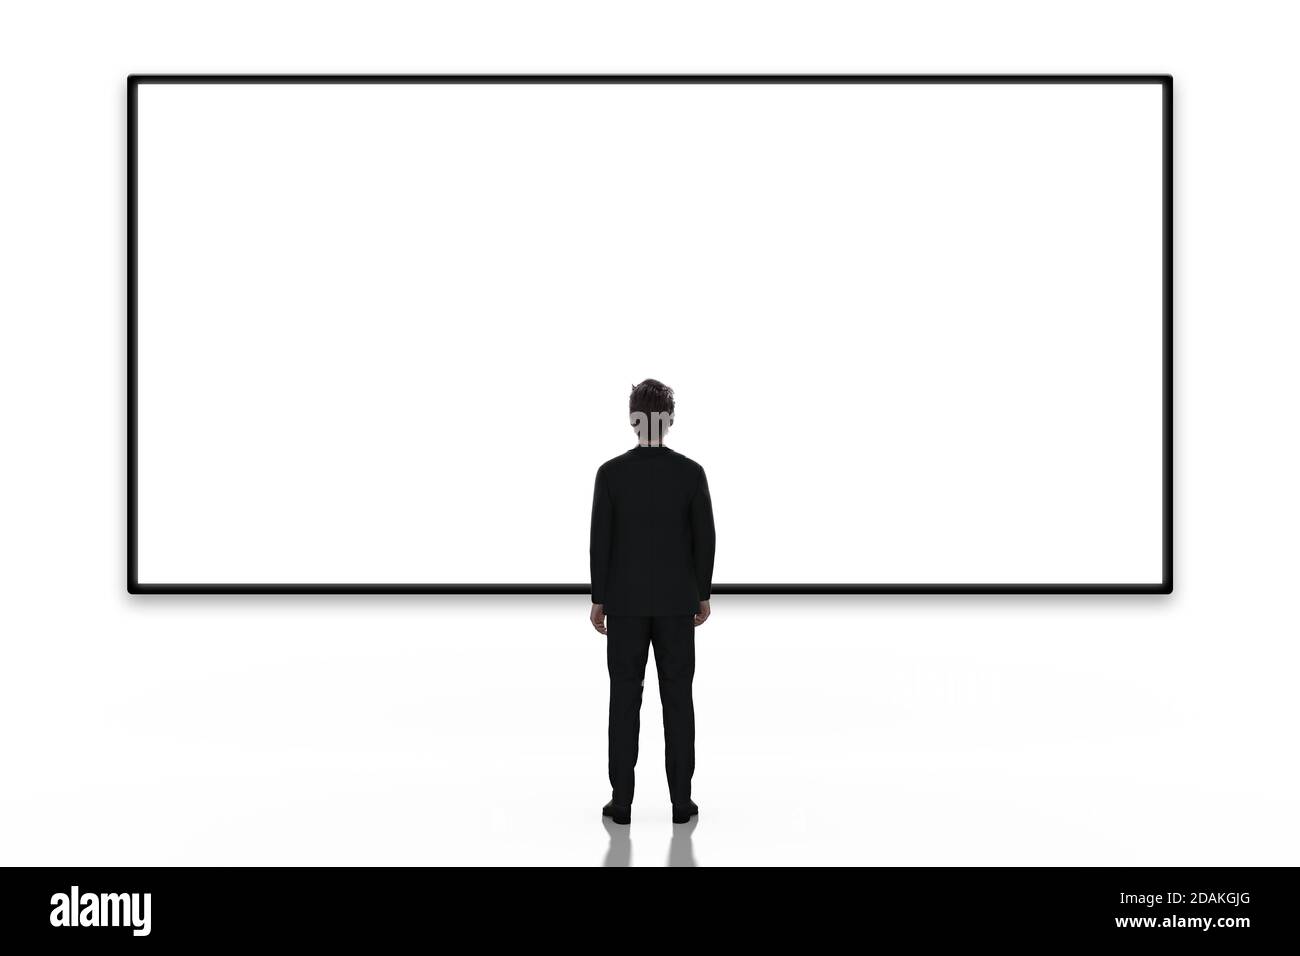 Business man looking at large blank screen or billboard on white background, rear view Stock Photo